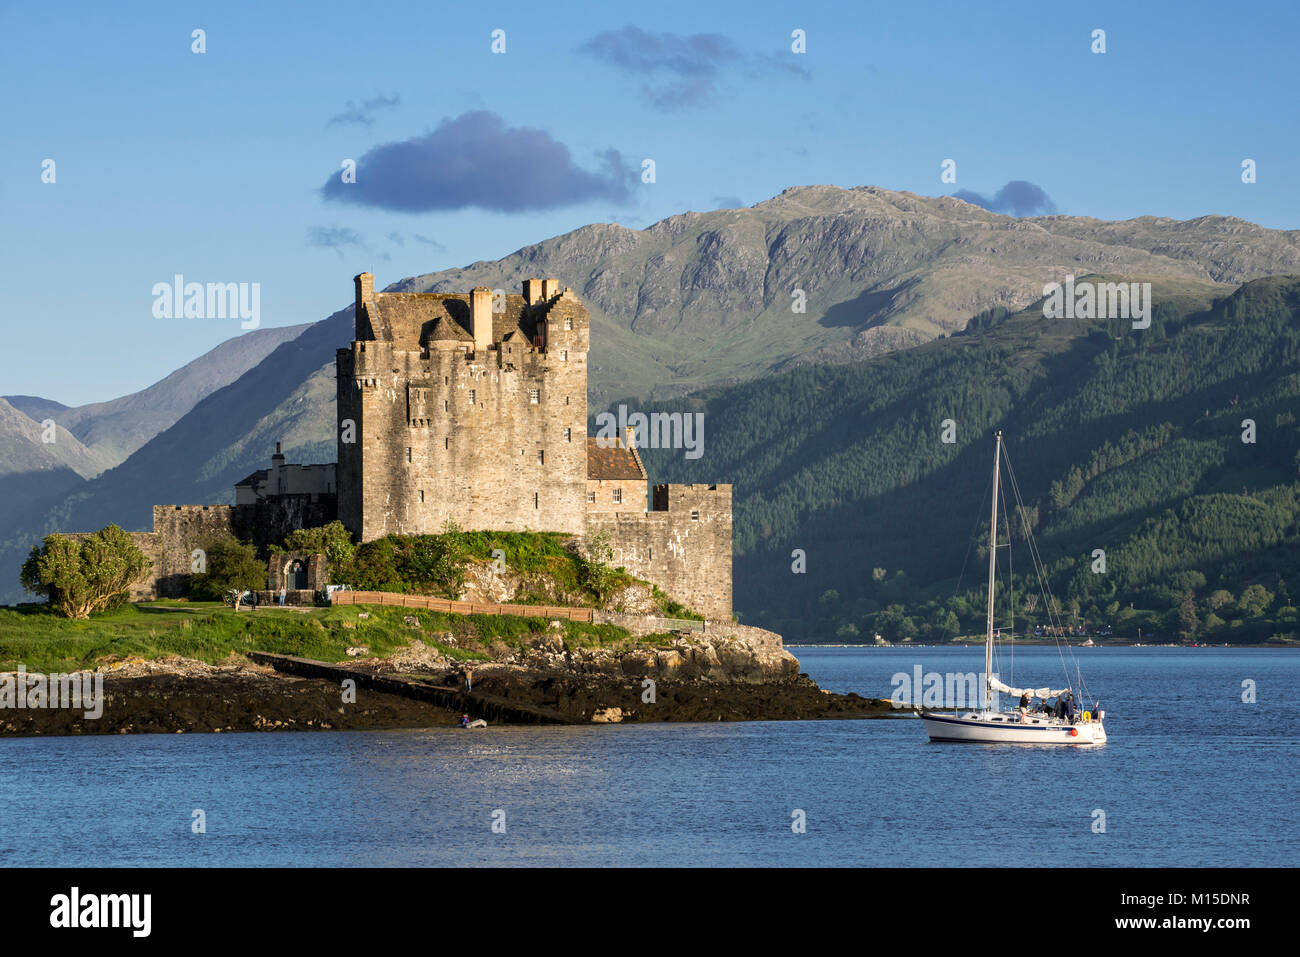 Sailing boat in front of Eilean Donan Castle in Loch Duich, Ross and Cromarty, Scottish Highlands, Scotland, UK Stock Photo